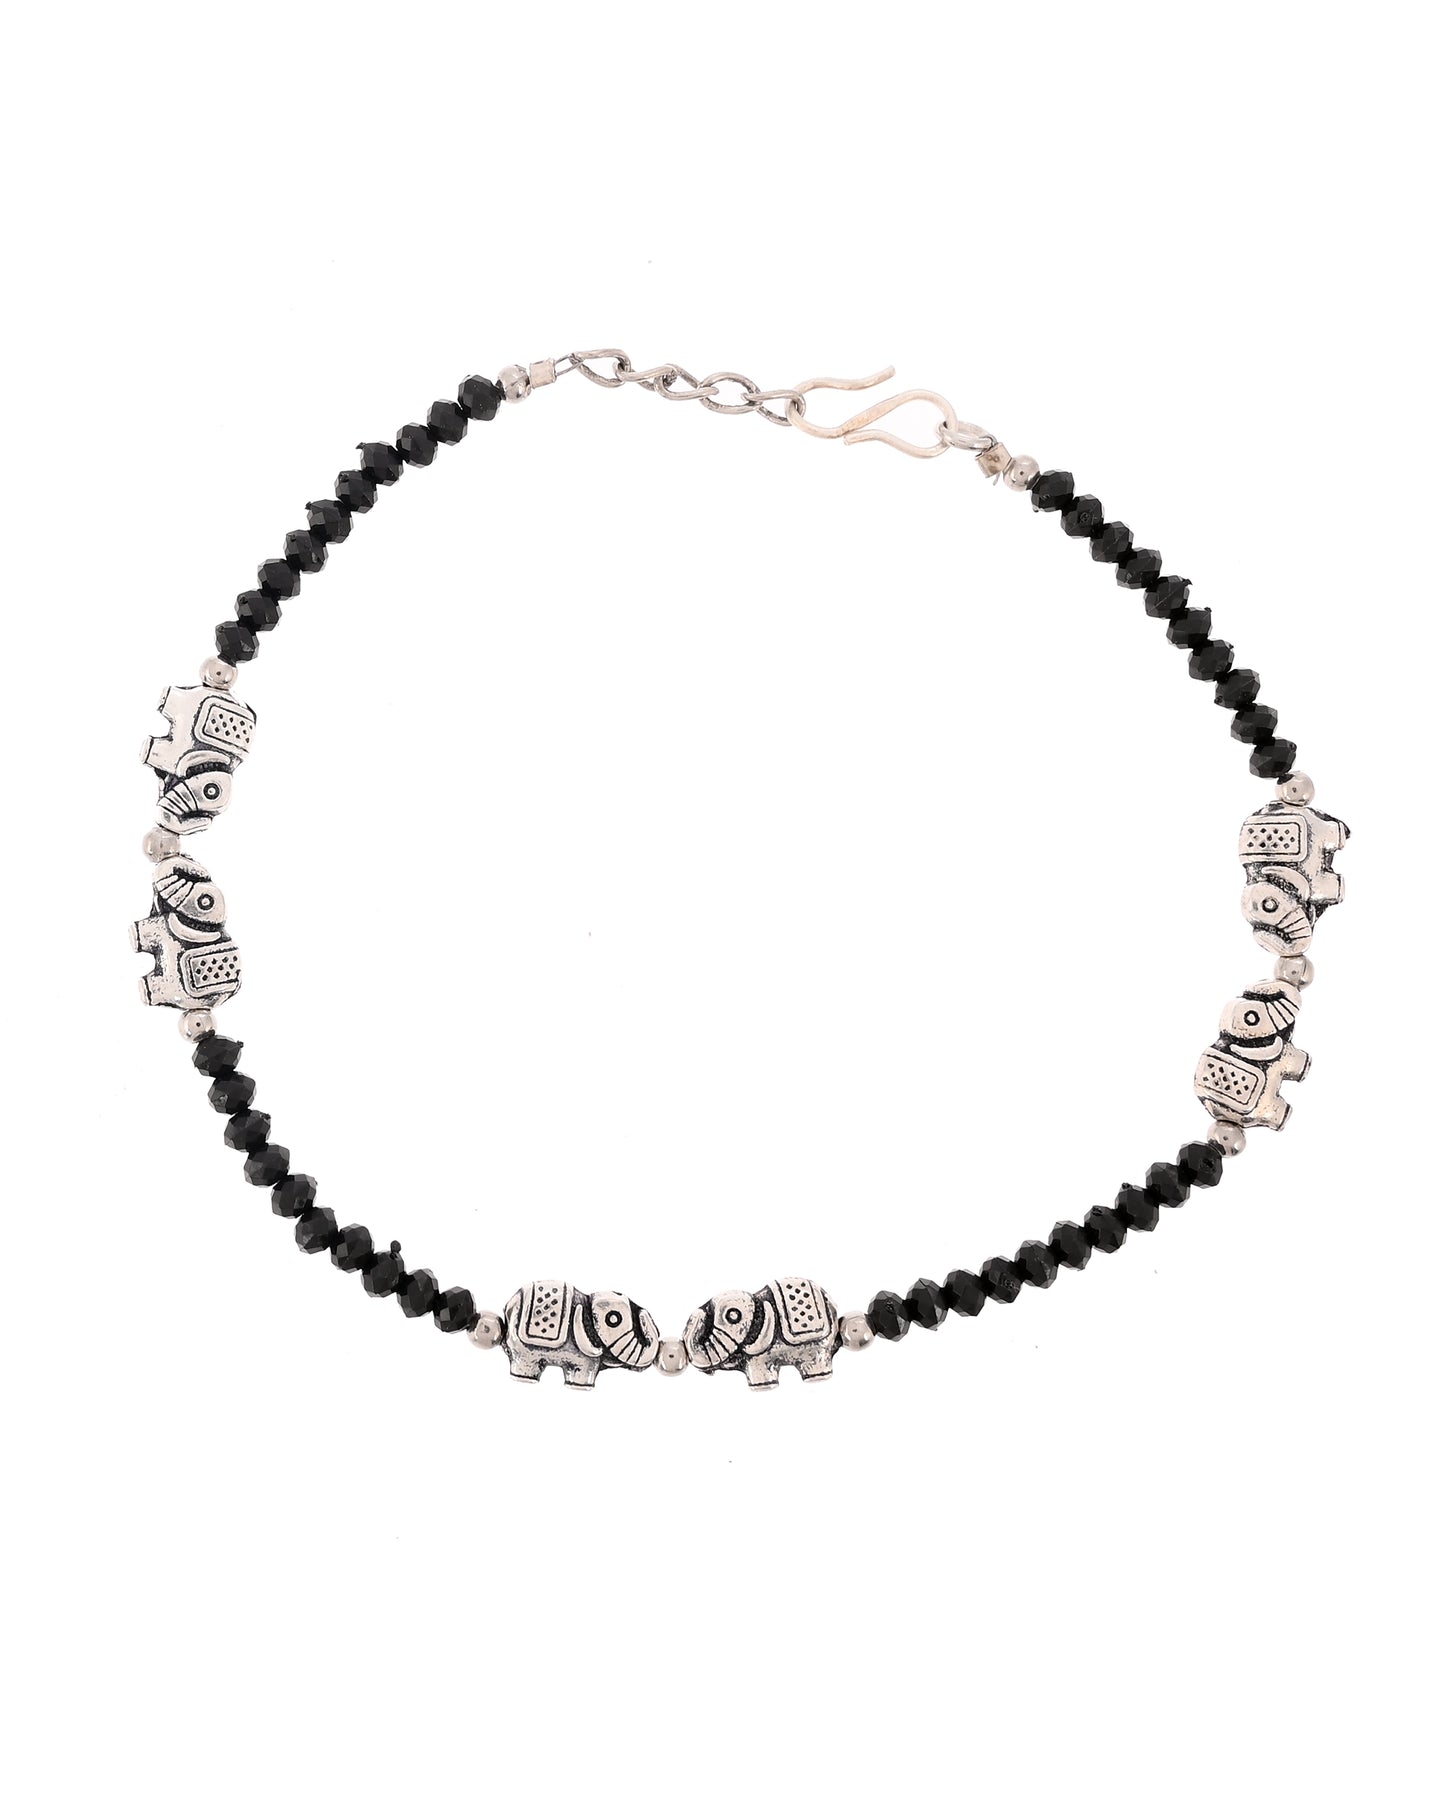 Silver Plated oxidized Black Beads Anklet With Elephant Charm